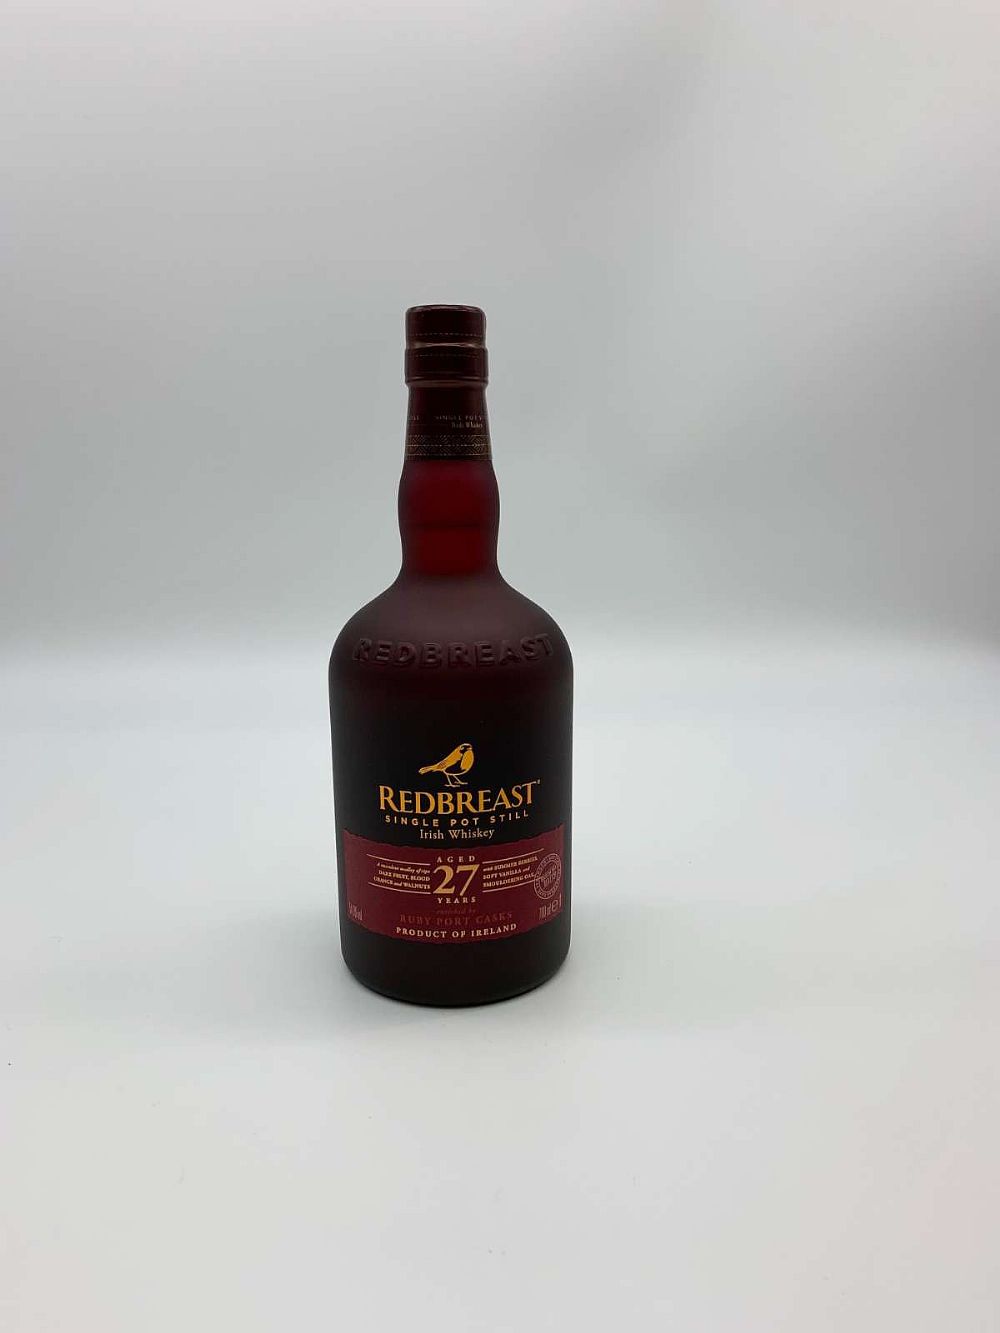 Redbreast 27 year old